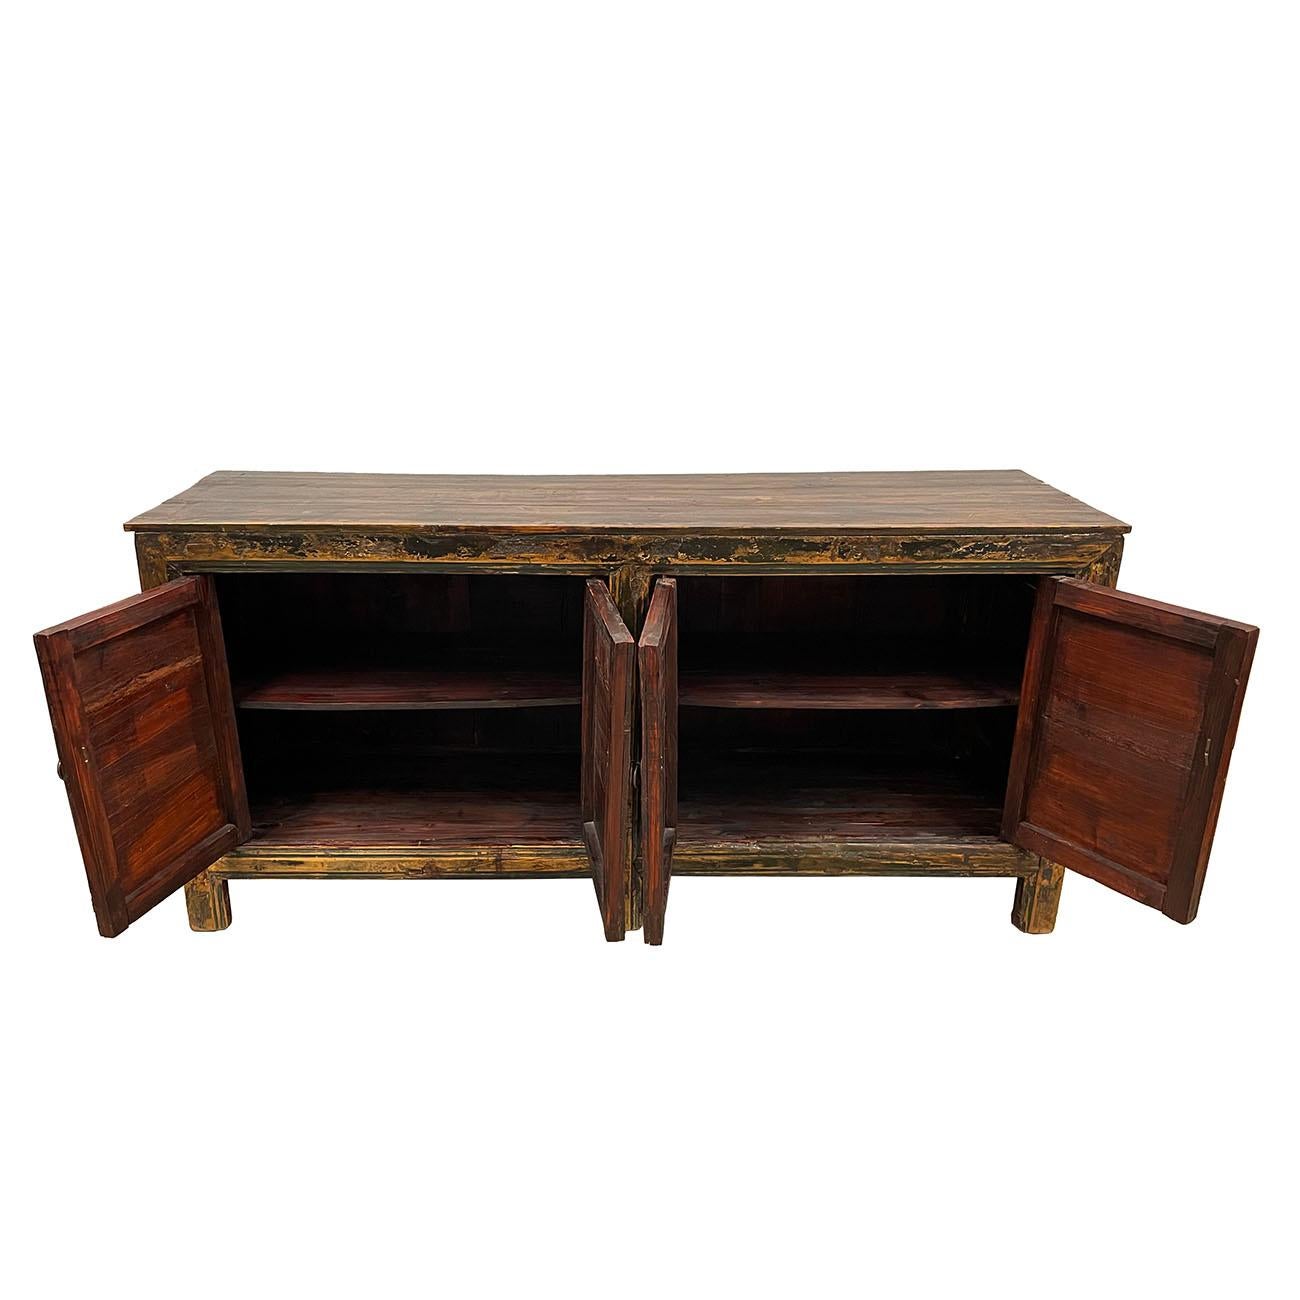 Chinese Export 19th Century Antique Chinese Mongolia Twin Cabinet/Buffet Table, Sideboard